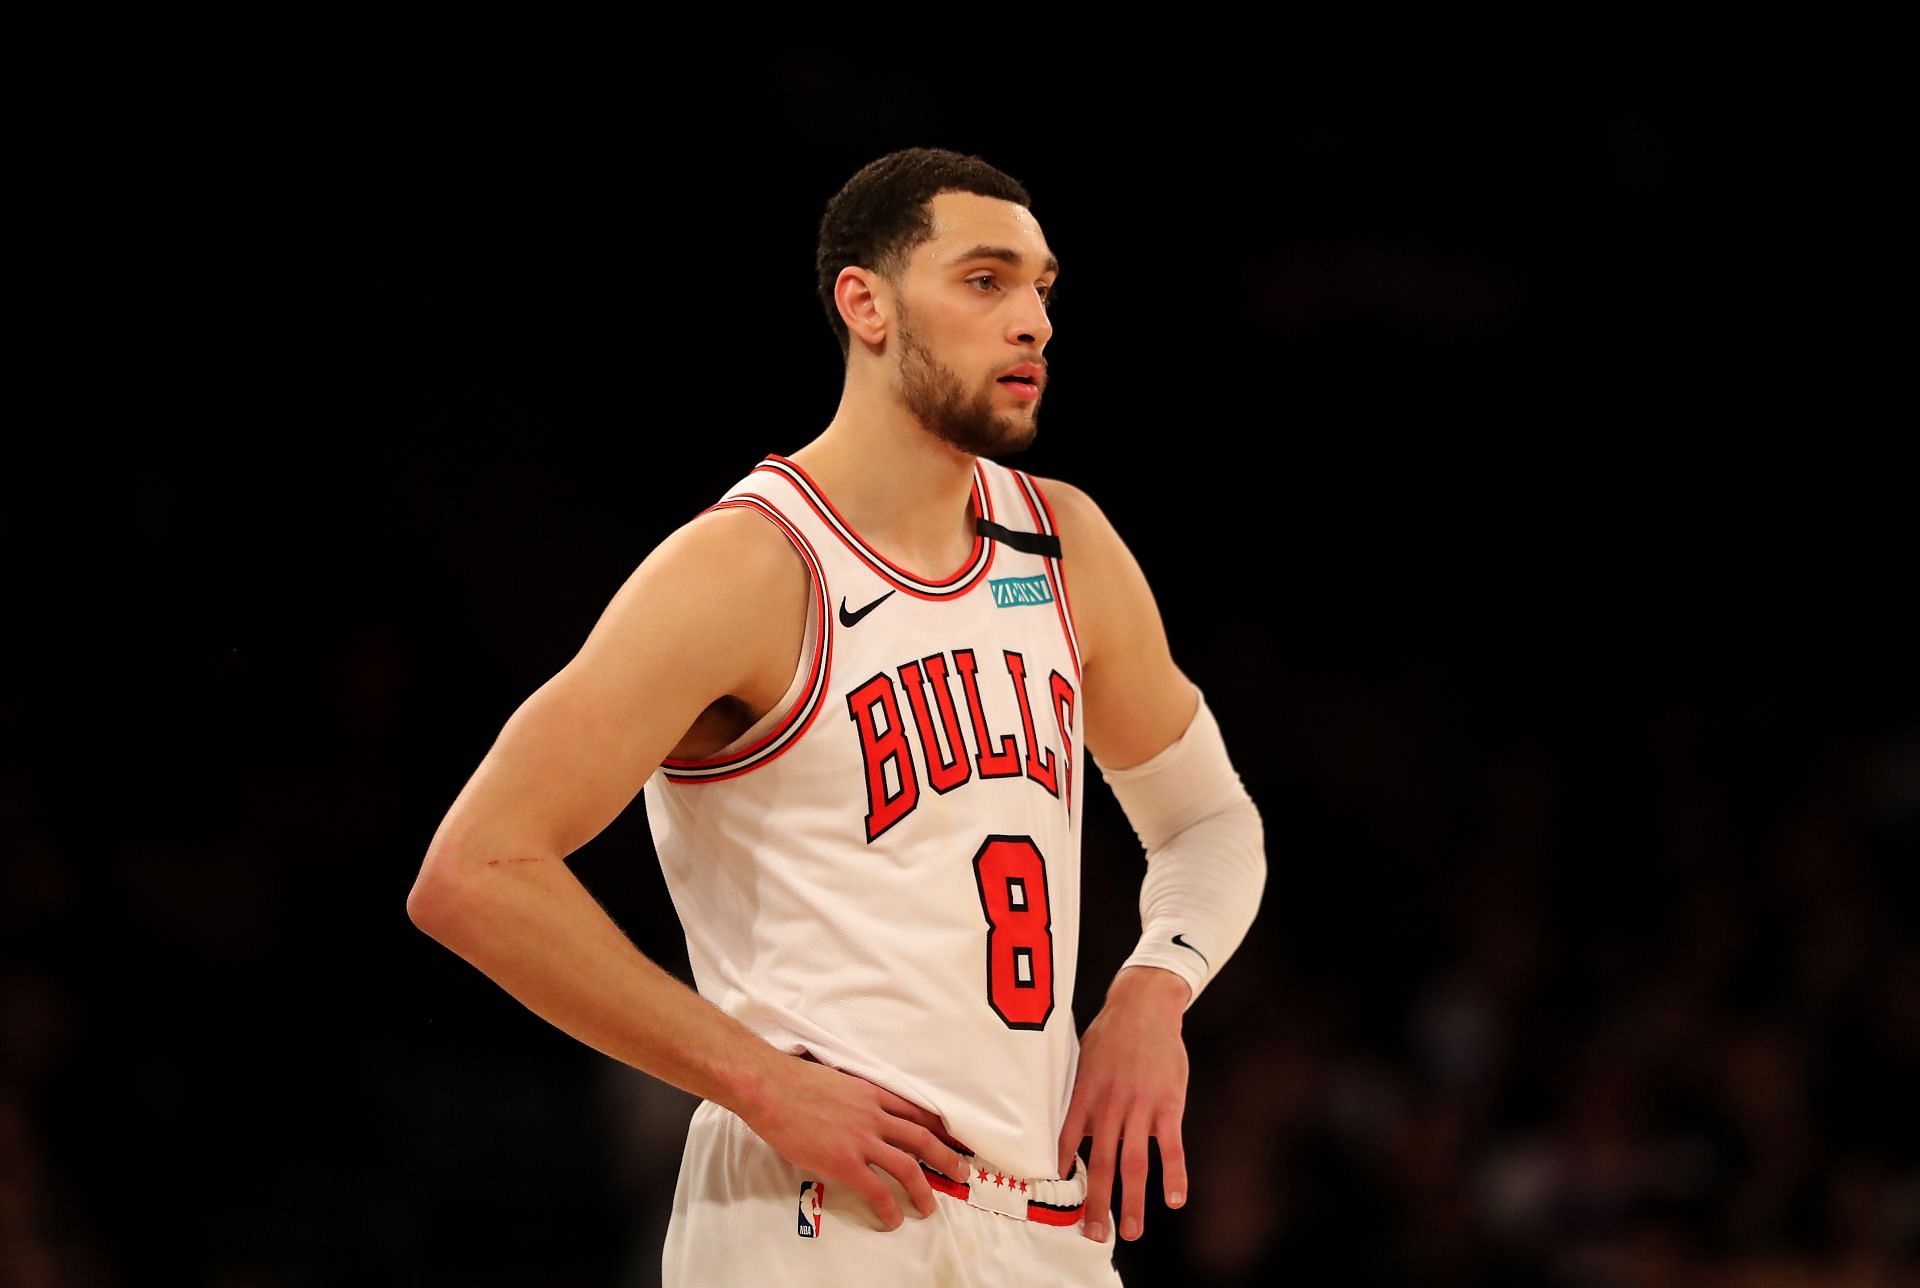 Zach LaVine played through with a torn ligament in his left thumb in the game against the New York Knicks.